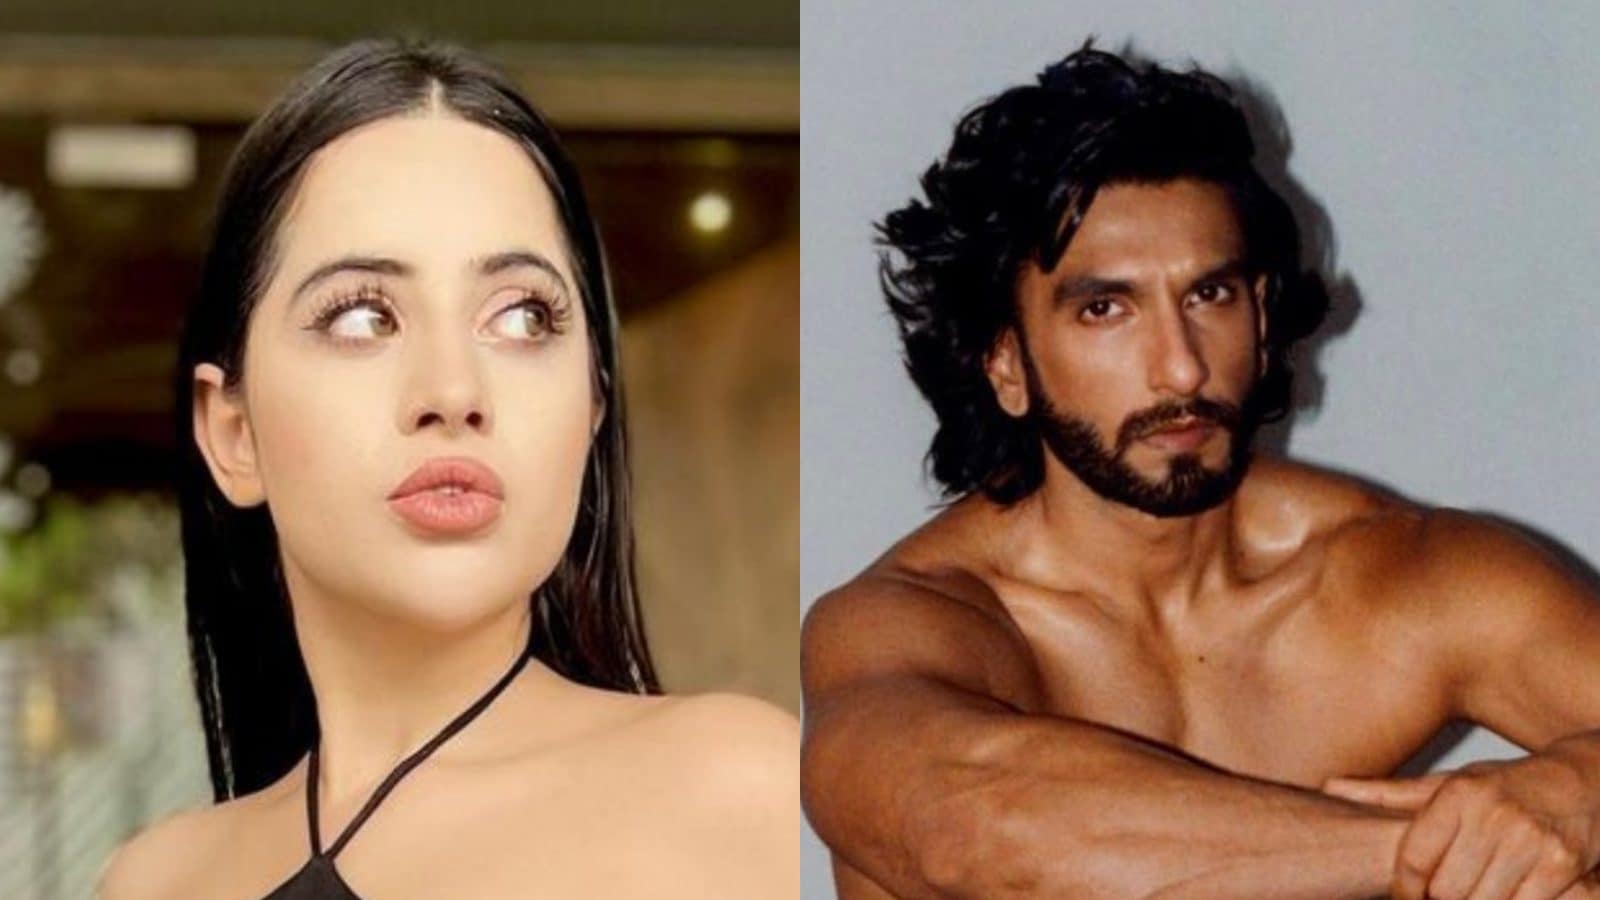 Uorfi Javed Reacts To Ranveer Singh's Nude Pictures, Says 'Nobody's  Sentiments Have Been Hurt' - News18